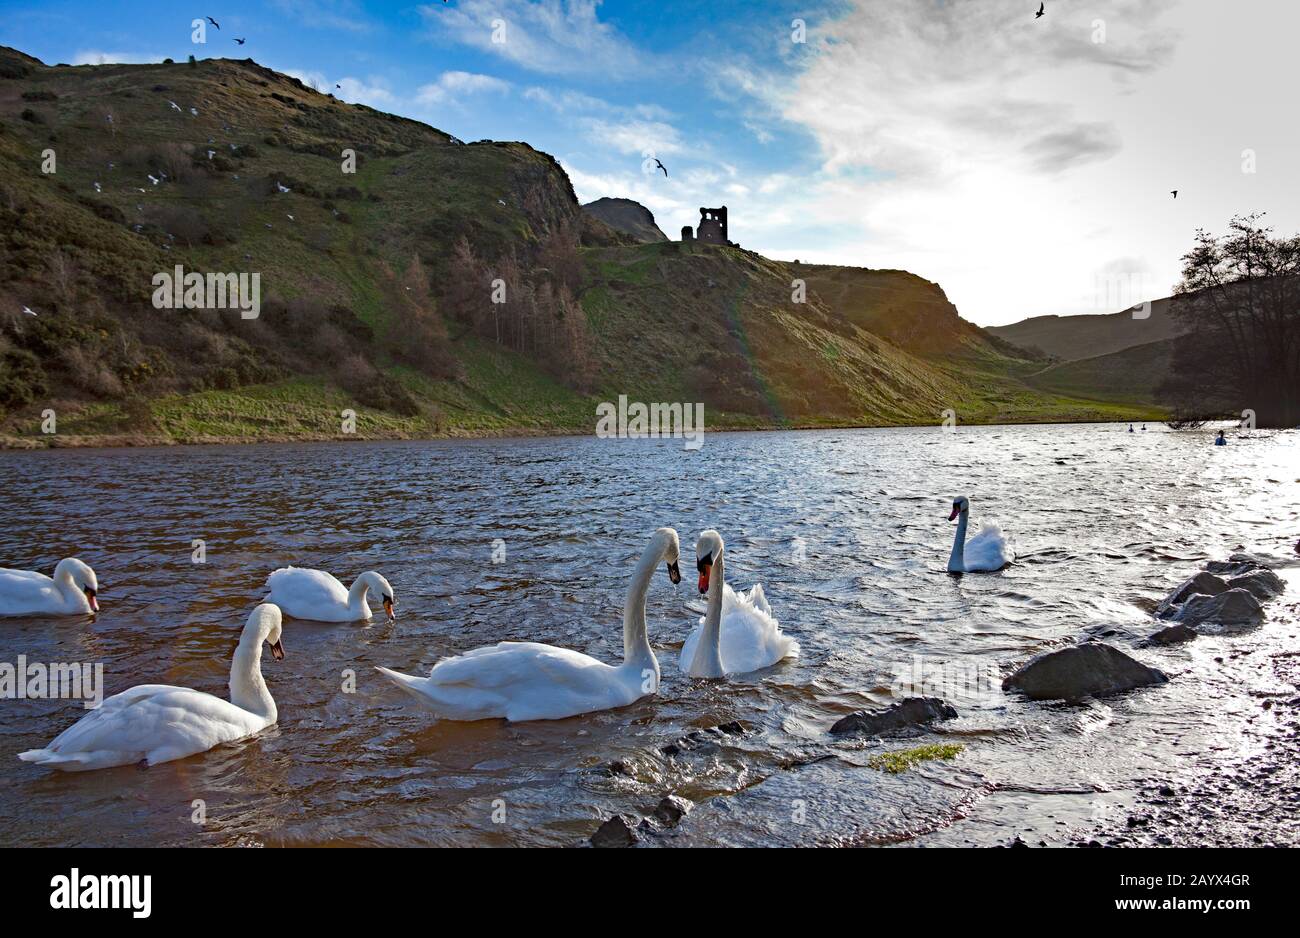 Holyrood Park, Edinburgh, Scotland, UK. 17th Feb. 2020. Sunshine and showers throughout the day with a brisk gusty wind. Mute Swans on St. Margarets Loch, which has overflowed onto the pavement due to exceptionally heavy overnight rain. St Anthony's Chapel in the background Stock Photo